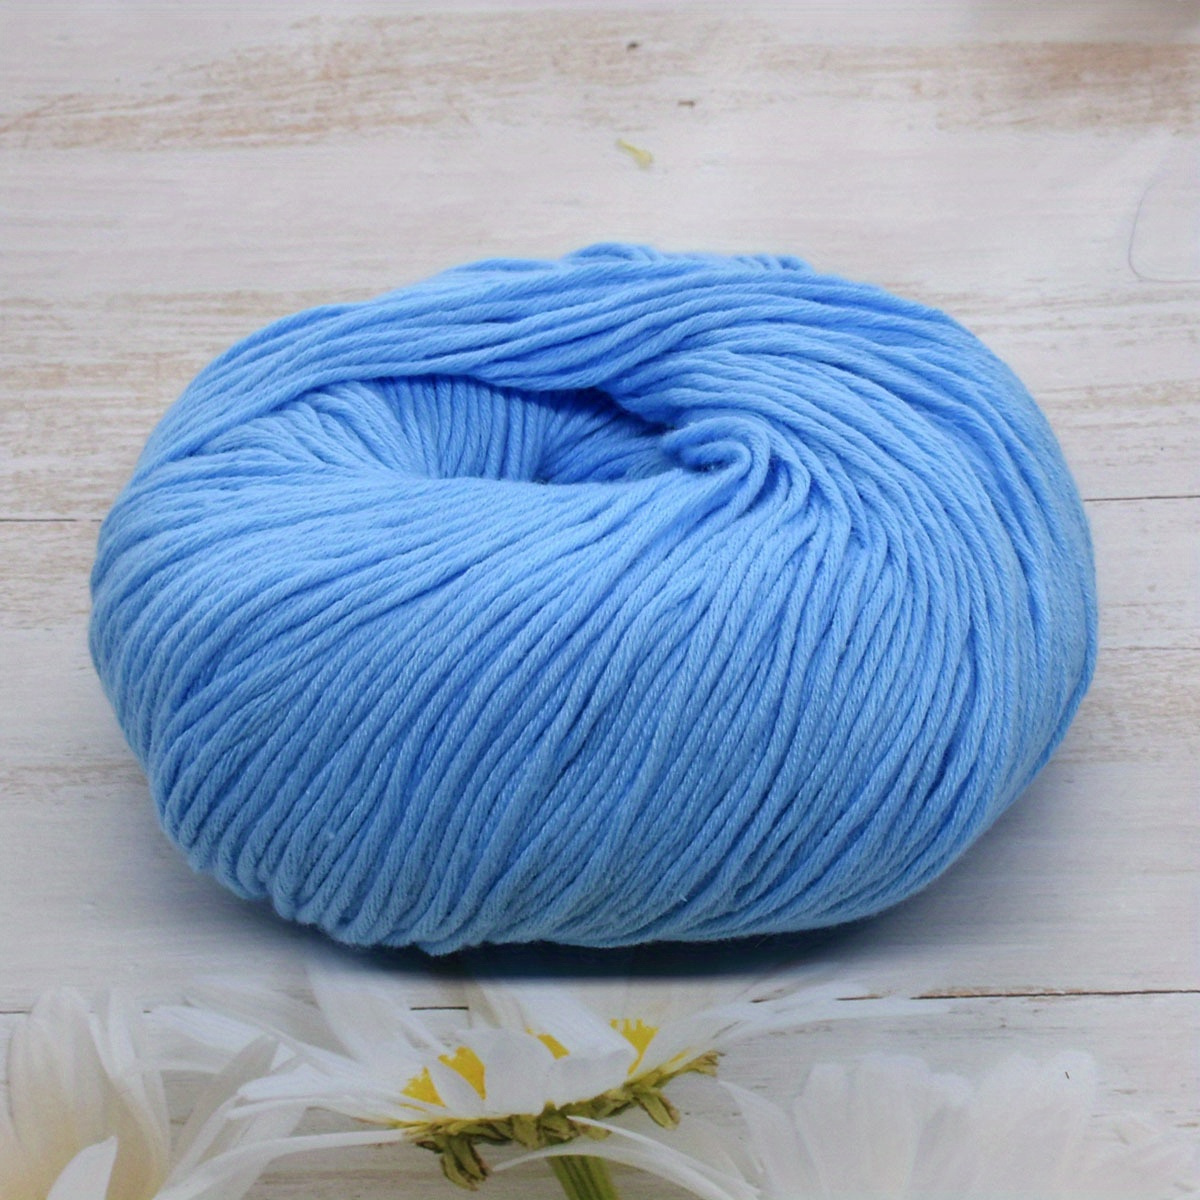 Cotton 4ply Yarns  50g 100% Pure Cotton to Knit or Crochet